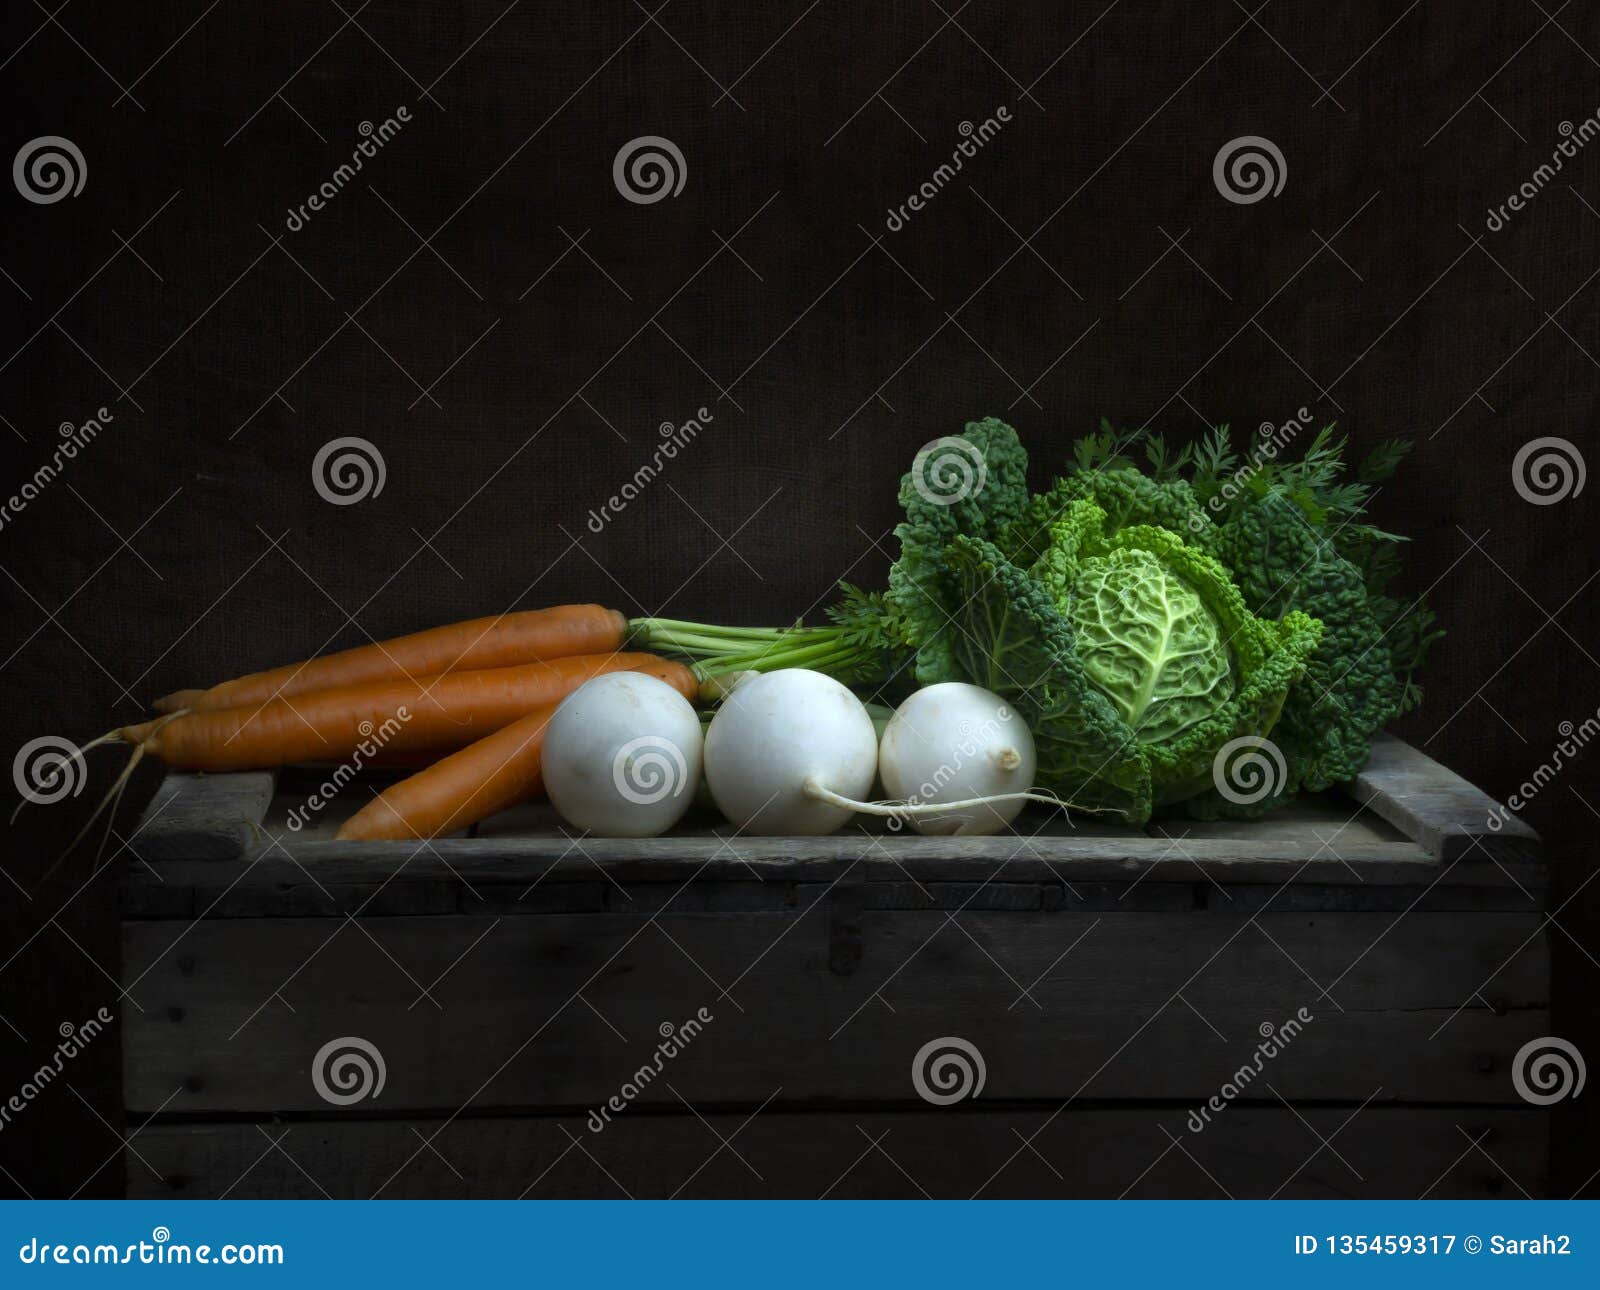 winter vegetables still life, chiaroscuro baroque style. light painting. cabbage, carrots, turnip.